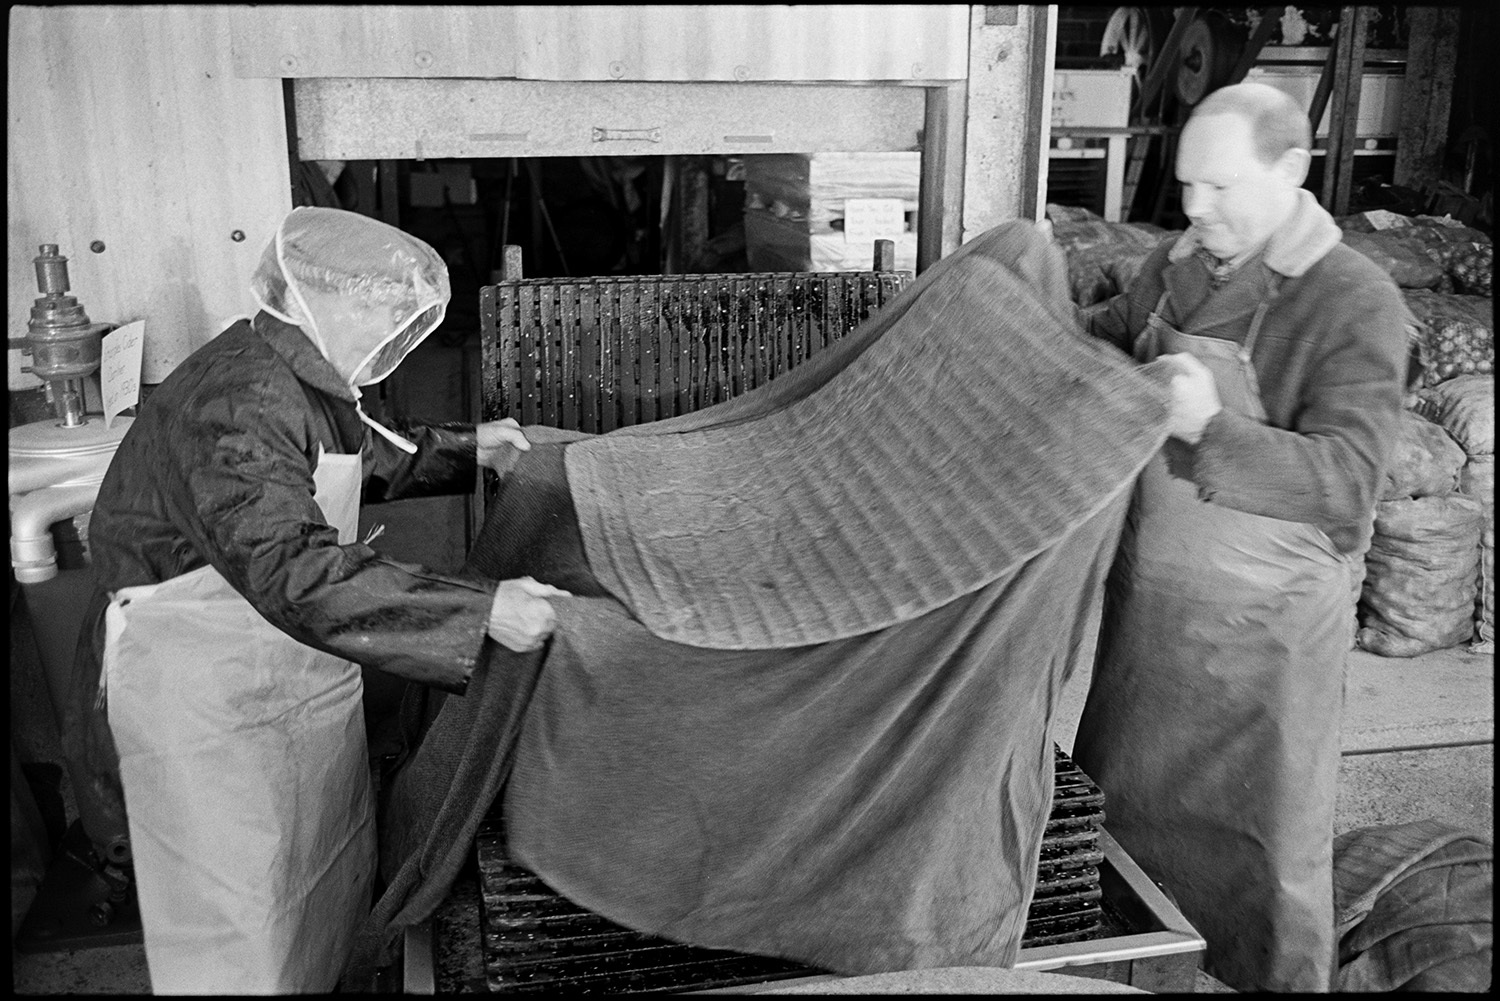 Cider making, men operating cider press in factory. 
[Two men draping a cover over a cider press at Hancock's cider factory at Clapworthy Mill, South Molton. One of them is wearing a polythene mask over his face.]